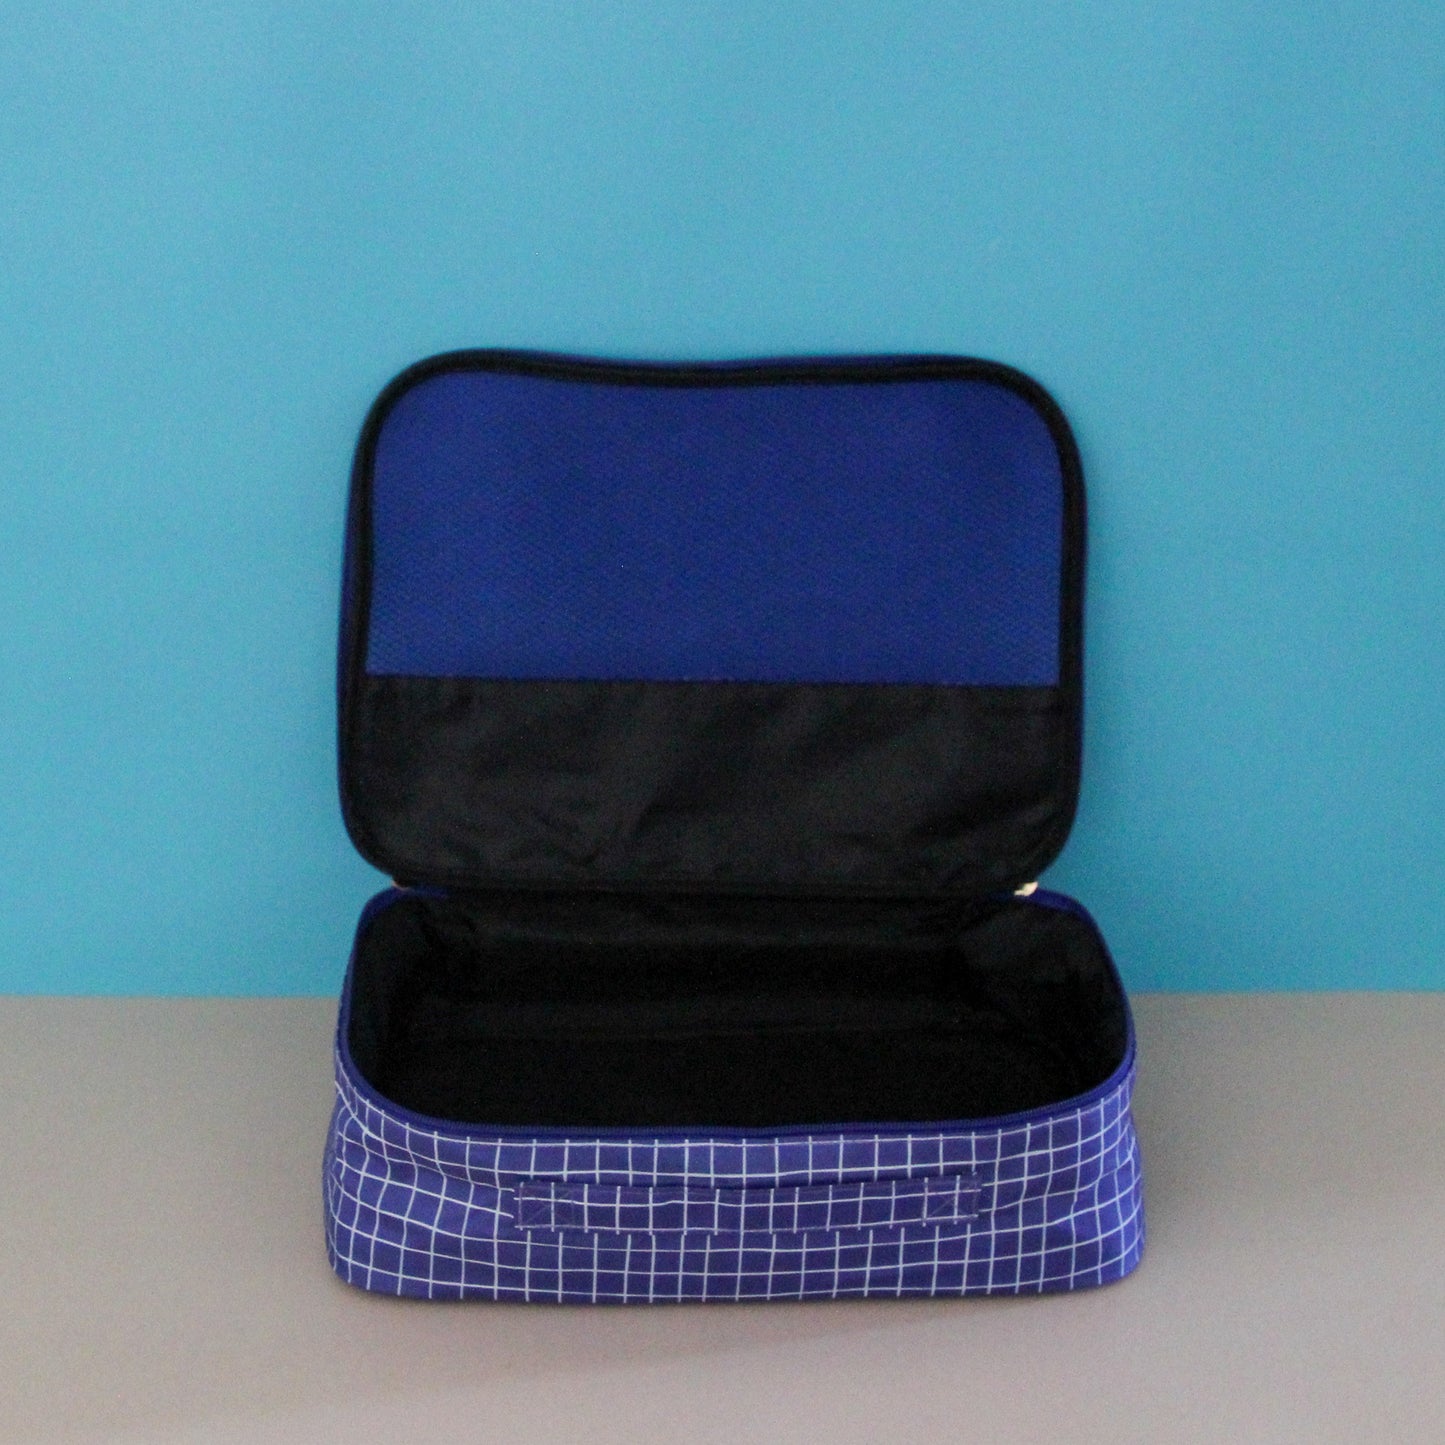 Checked Out Packing Cube - Medium